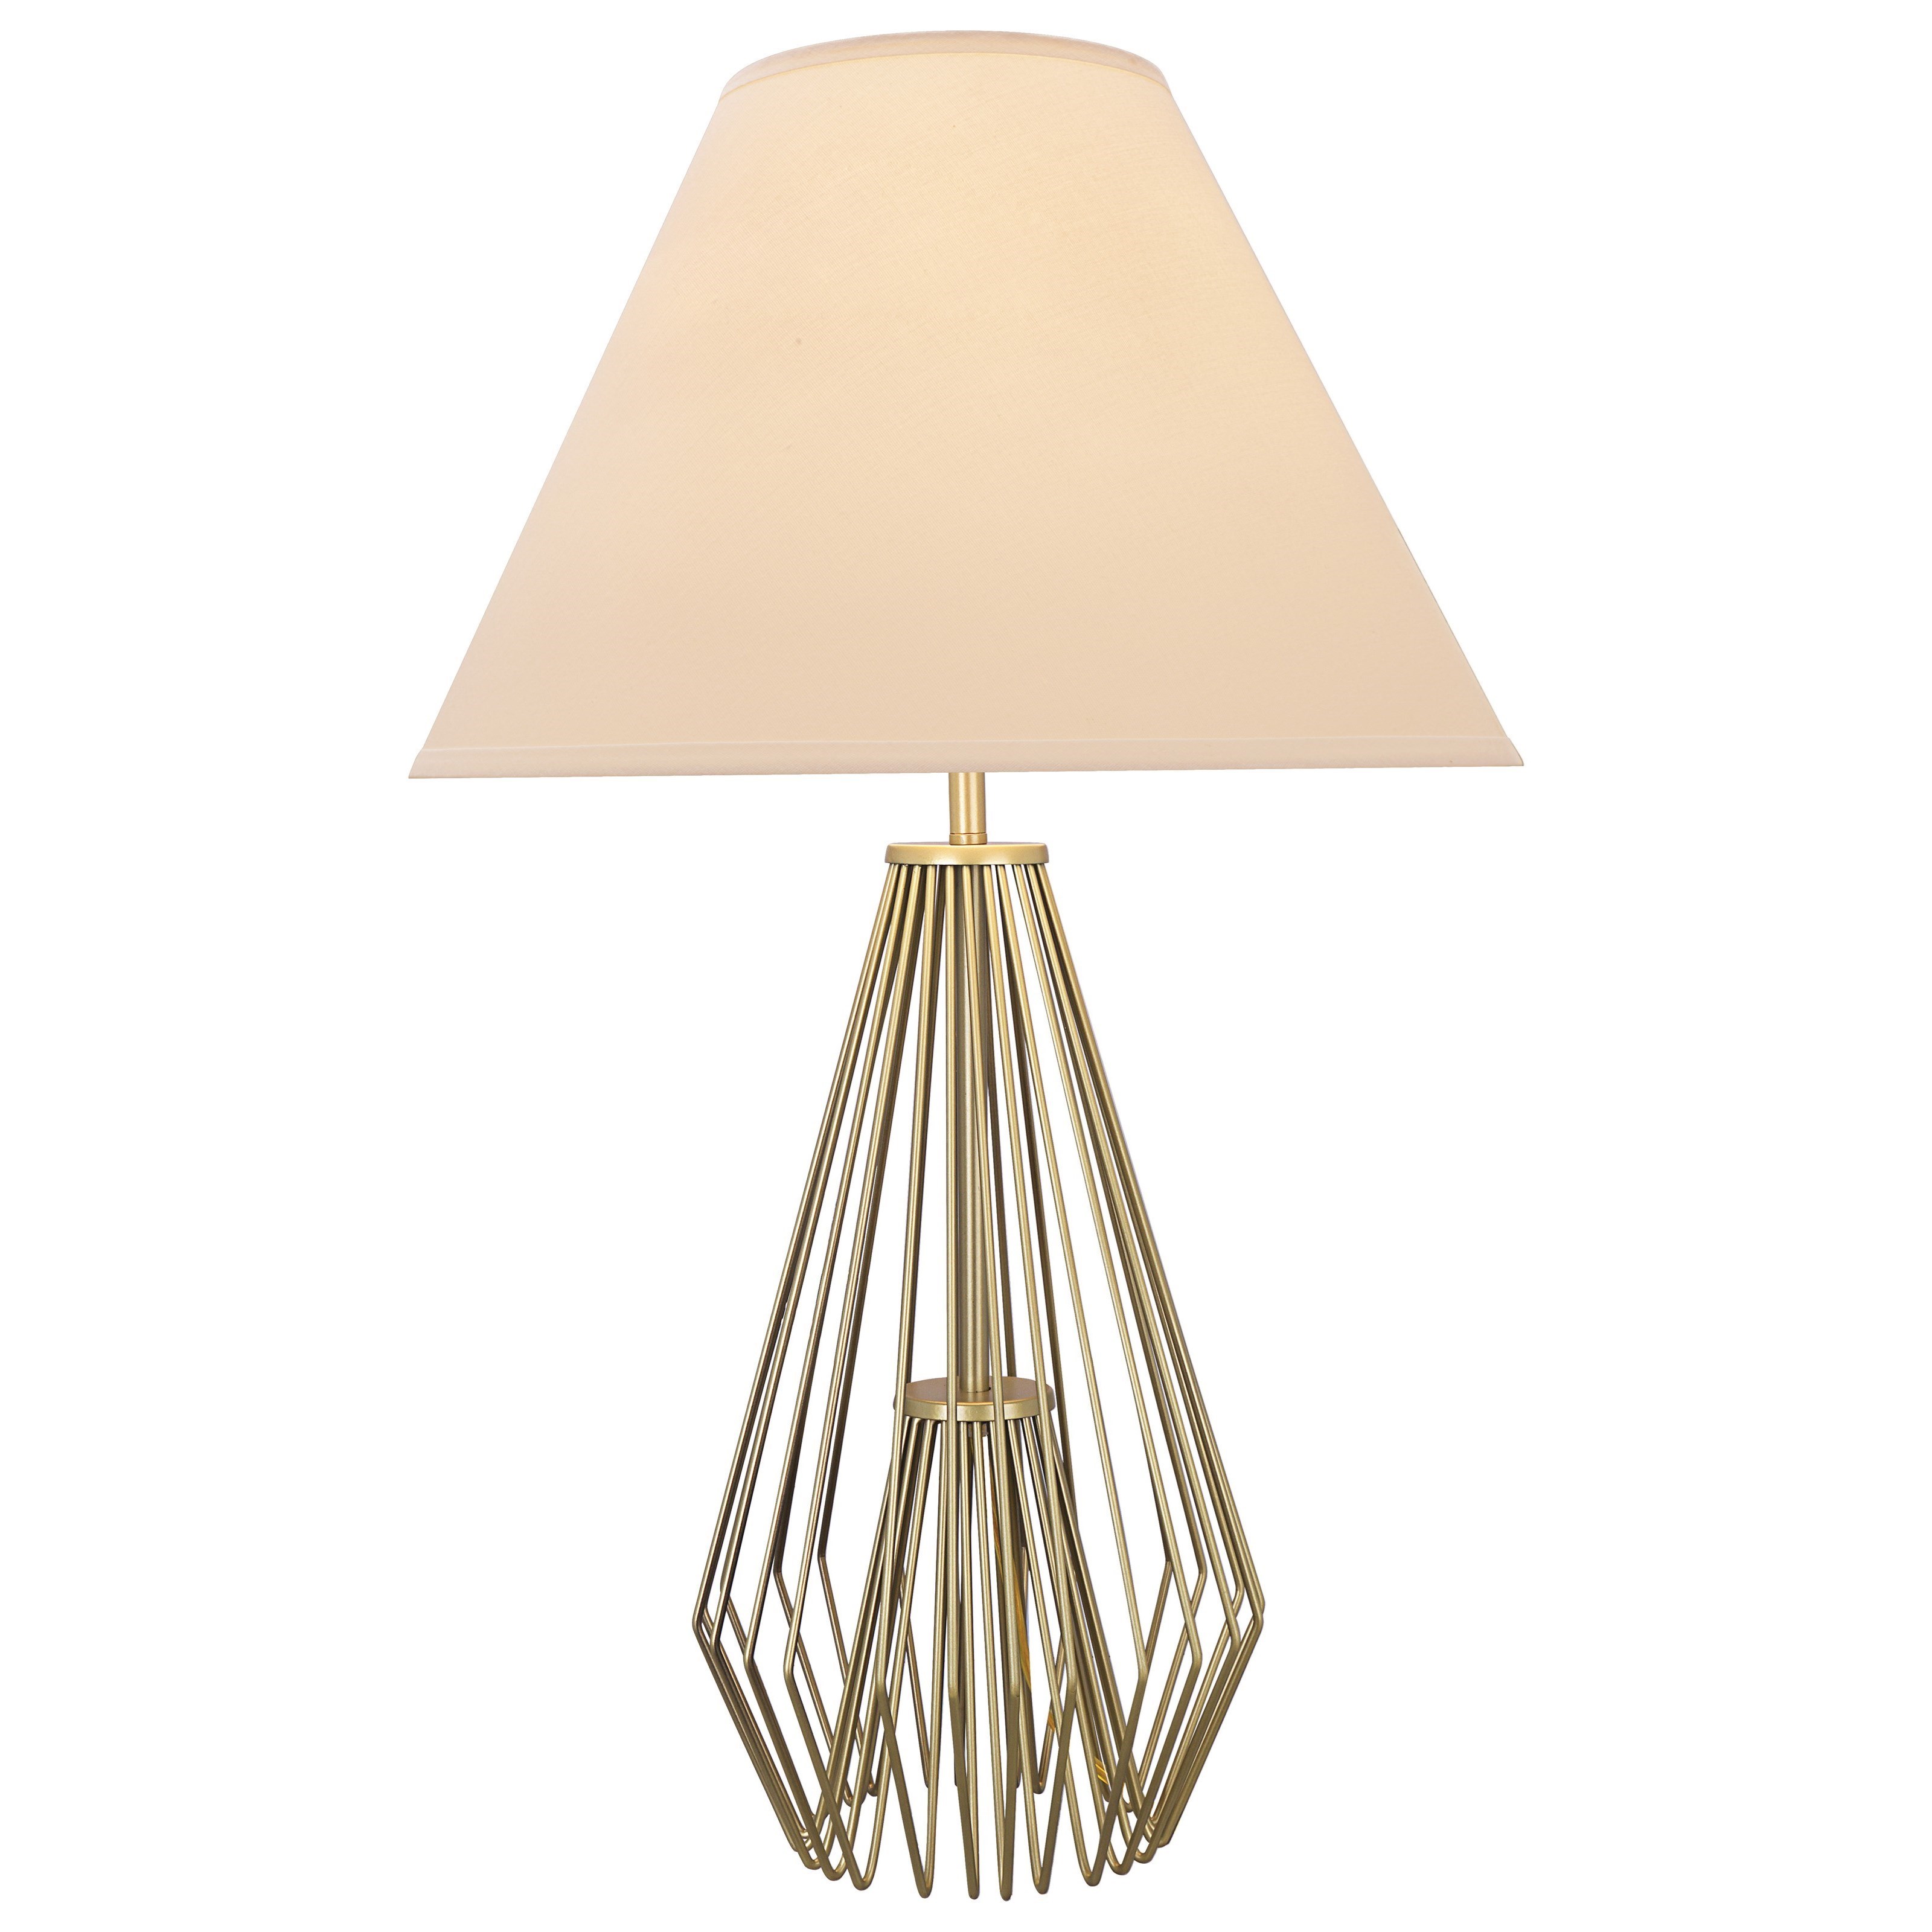 Acme Furniture Masumi 40239 Contemporary Table Lamp with Gold